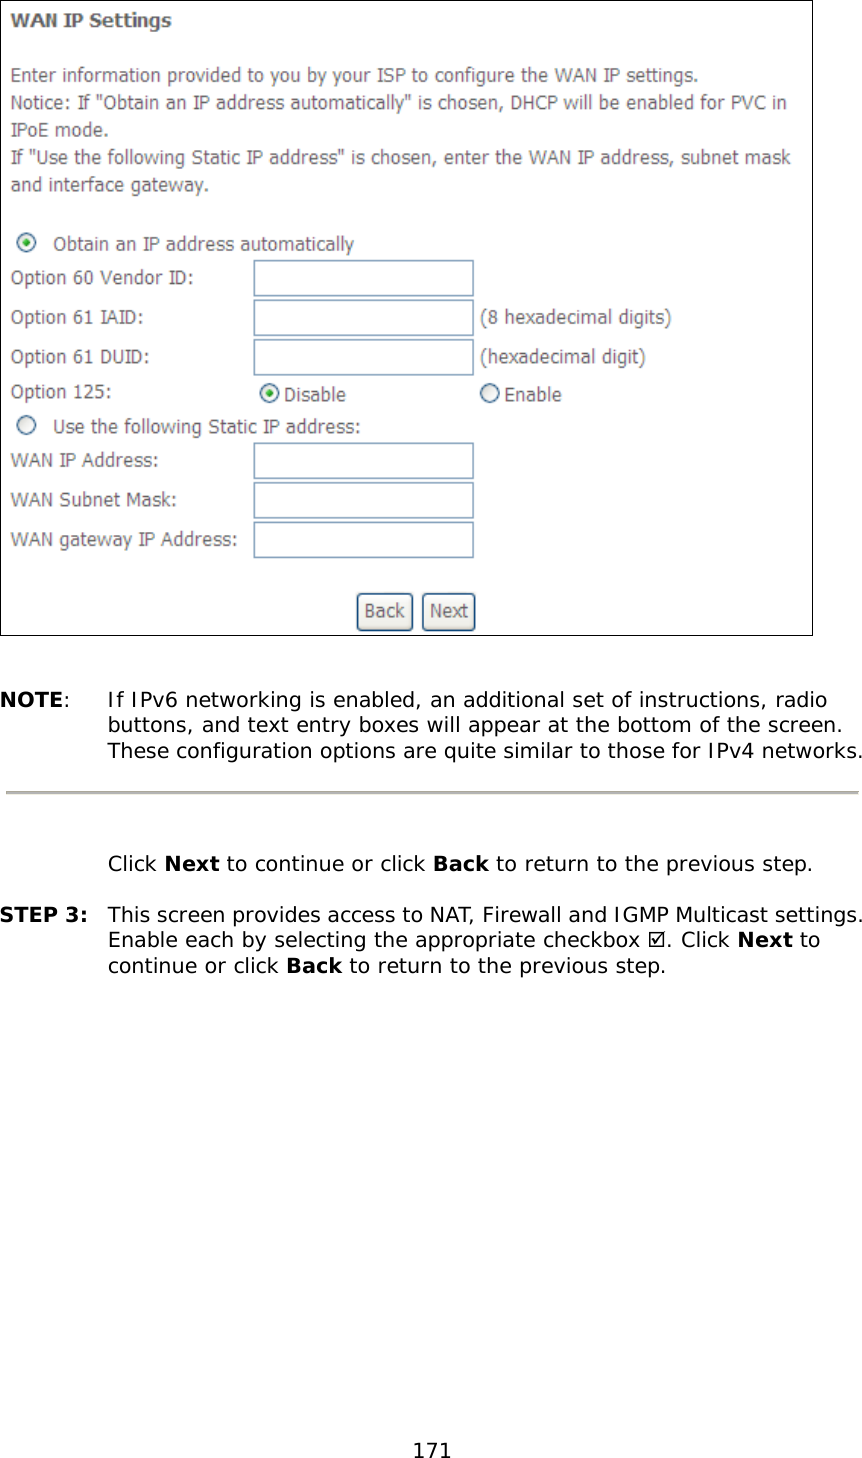  171    NOTE:  If IPv6 networking is enabled, an additional set of instructions, radio buttons, and text entry boxes will appear at the bottom of the screen.  These configuration options are quite similar to those for IPv4 networks.    Click Next to continue or click Back to return to the previous step.  STEP 3:  This screen provides access to NAT, Firewall and IGMP Multicast settings. Enable each by selecting the appropriate checkbox . Click Next to continue or click Back to return to the previous step.  